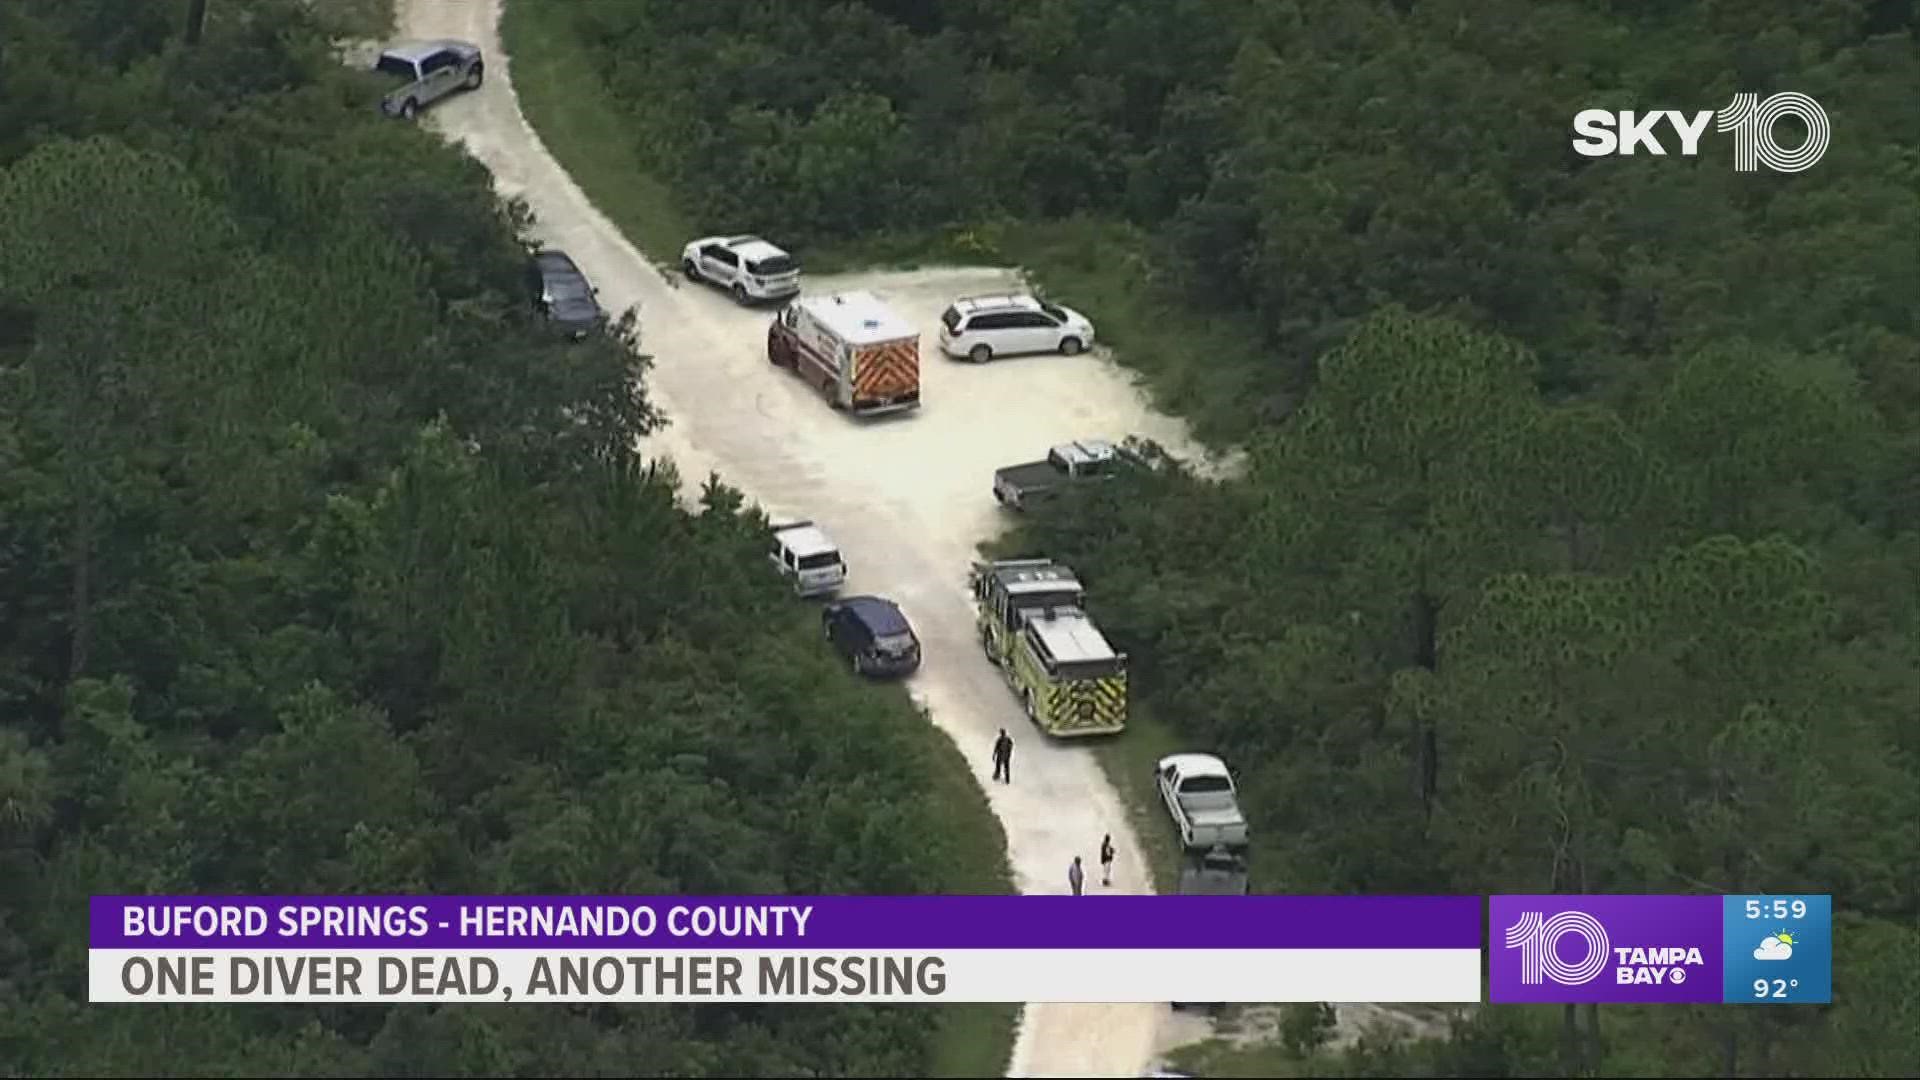 Firefighters and deputies responded to a deadly diving incident Wednesday at Buford Springs, located north of Weeki Wachee, in Hernando County.